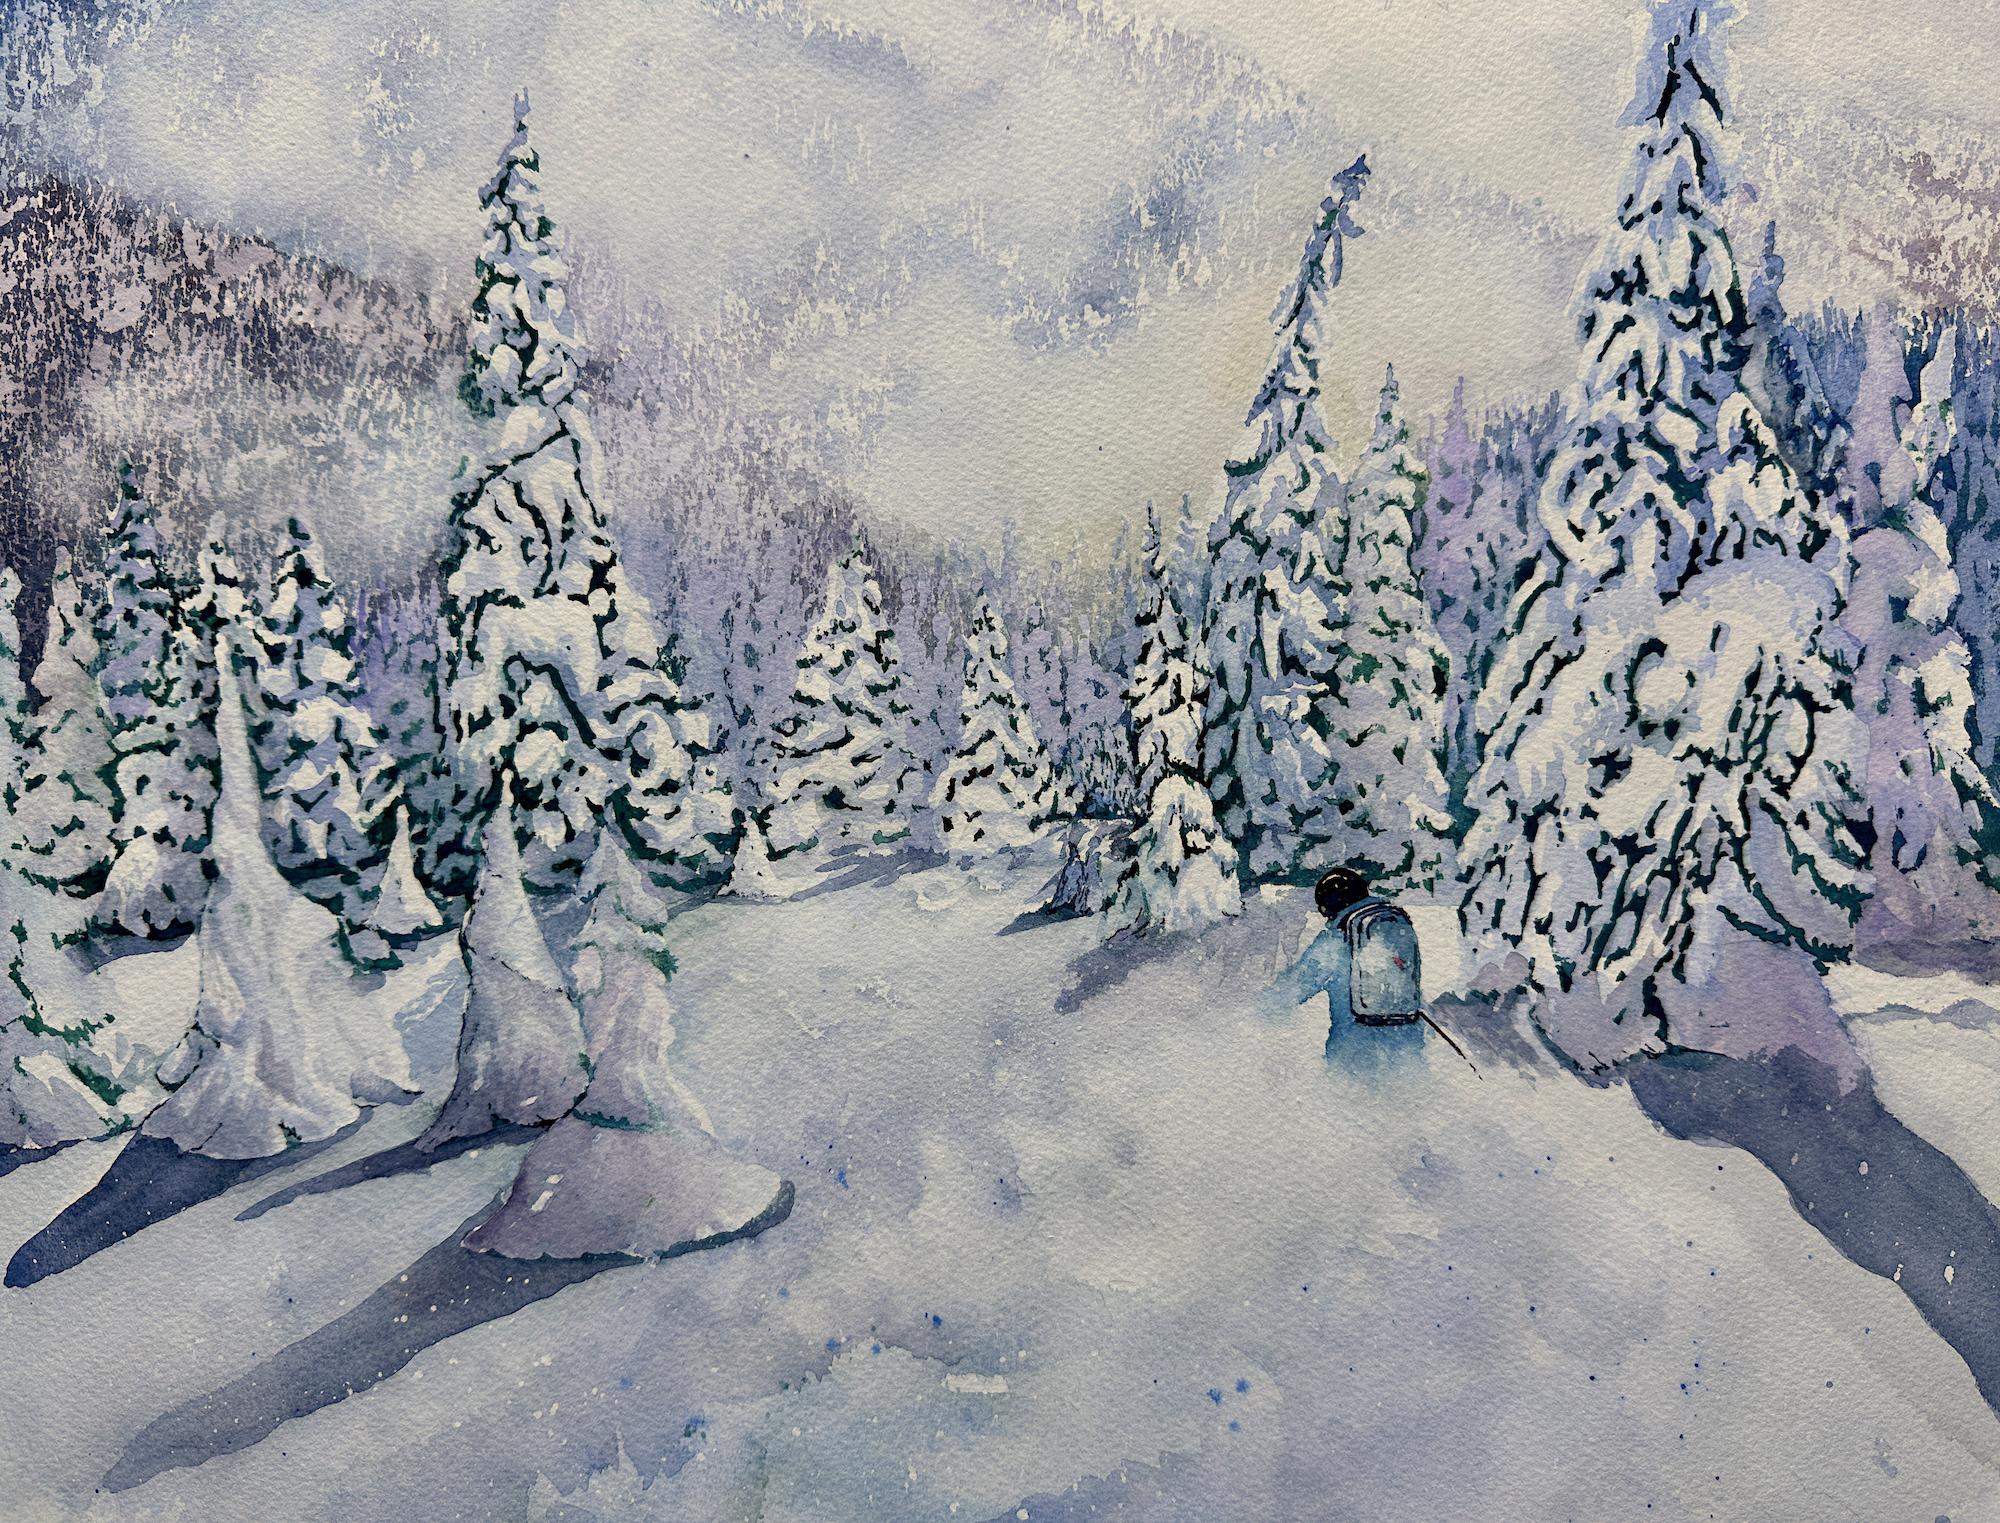 First Tracks, Original Painting - Art by Maurice Dionne